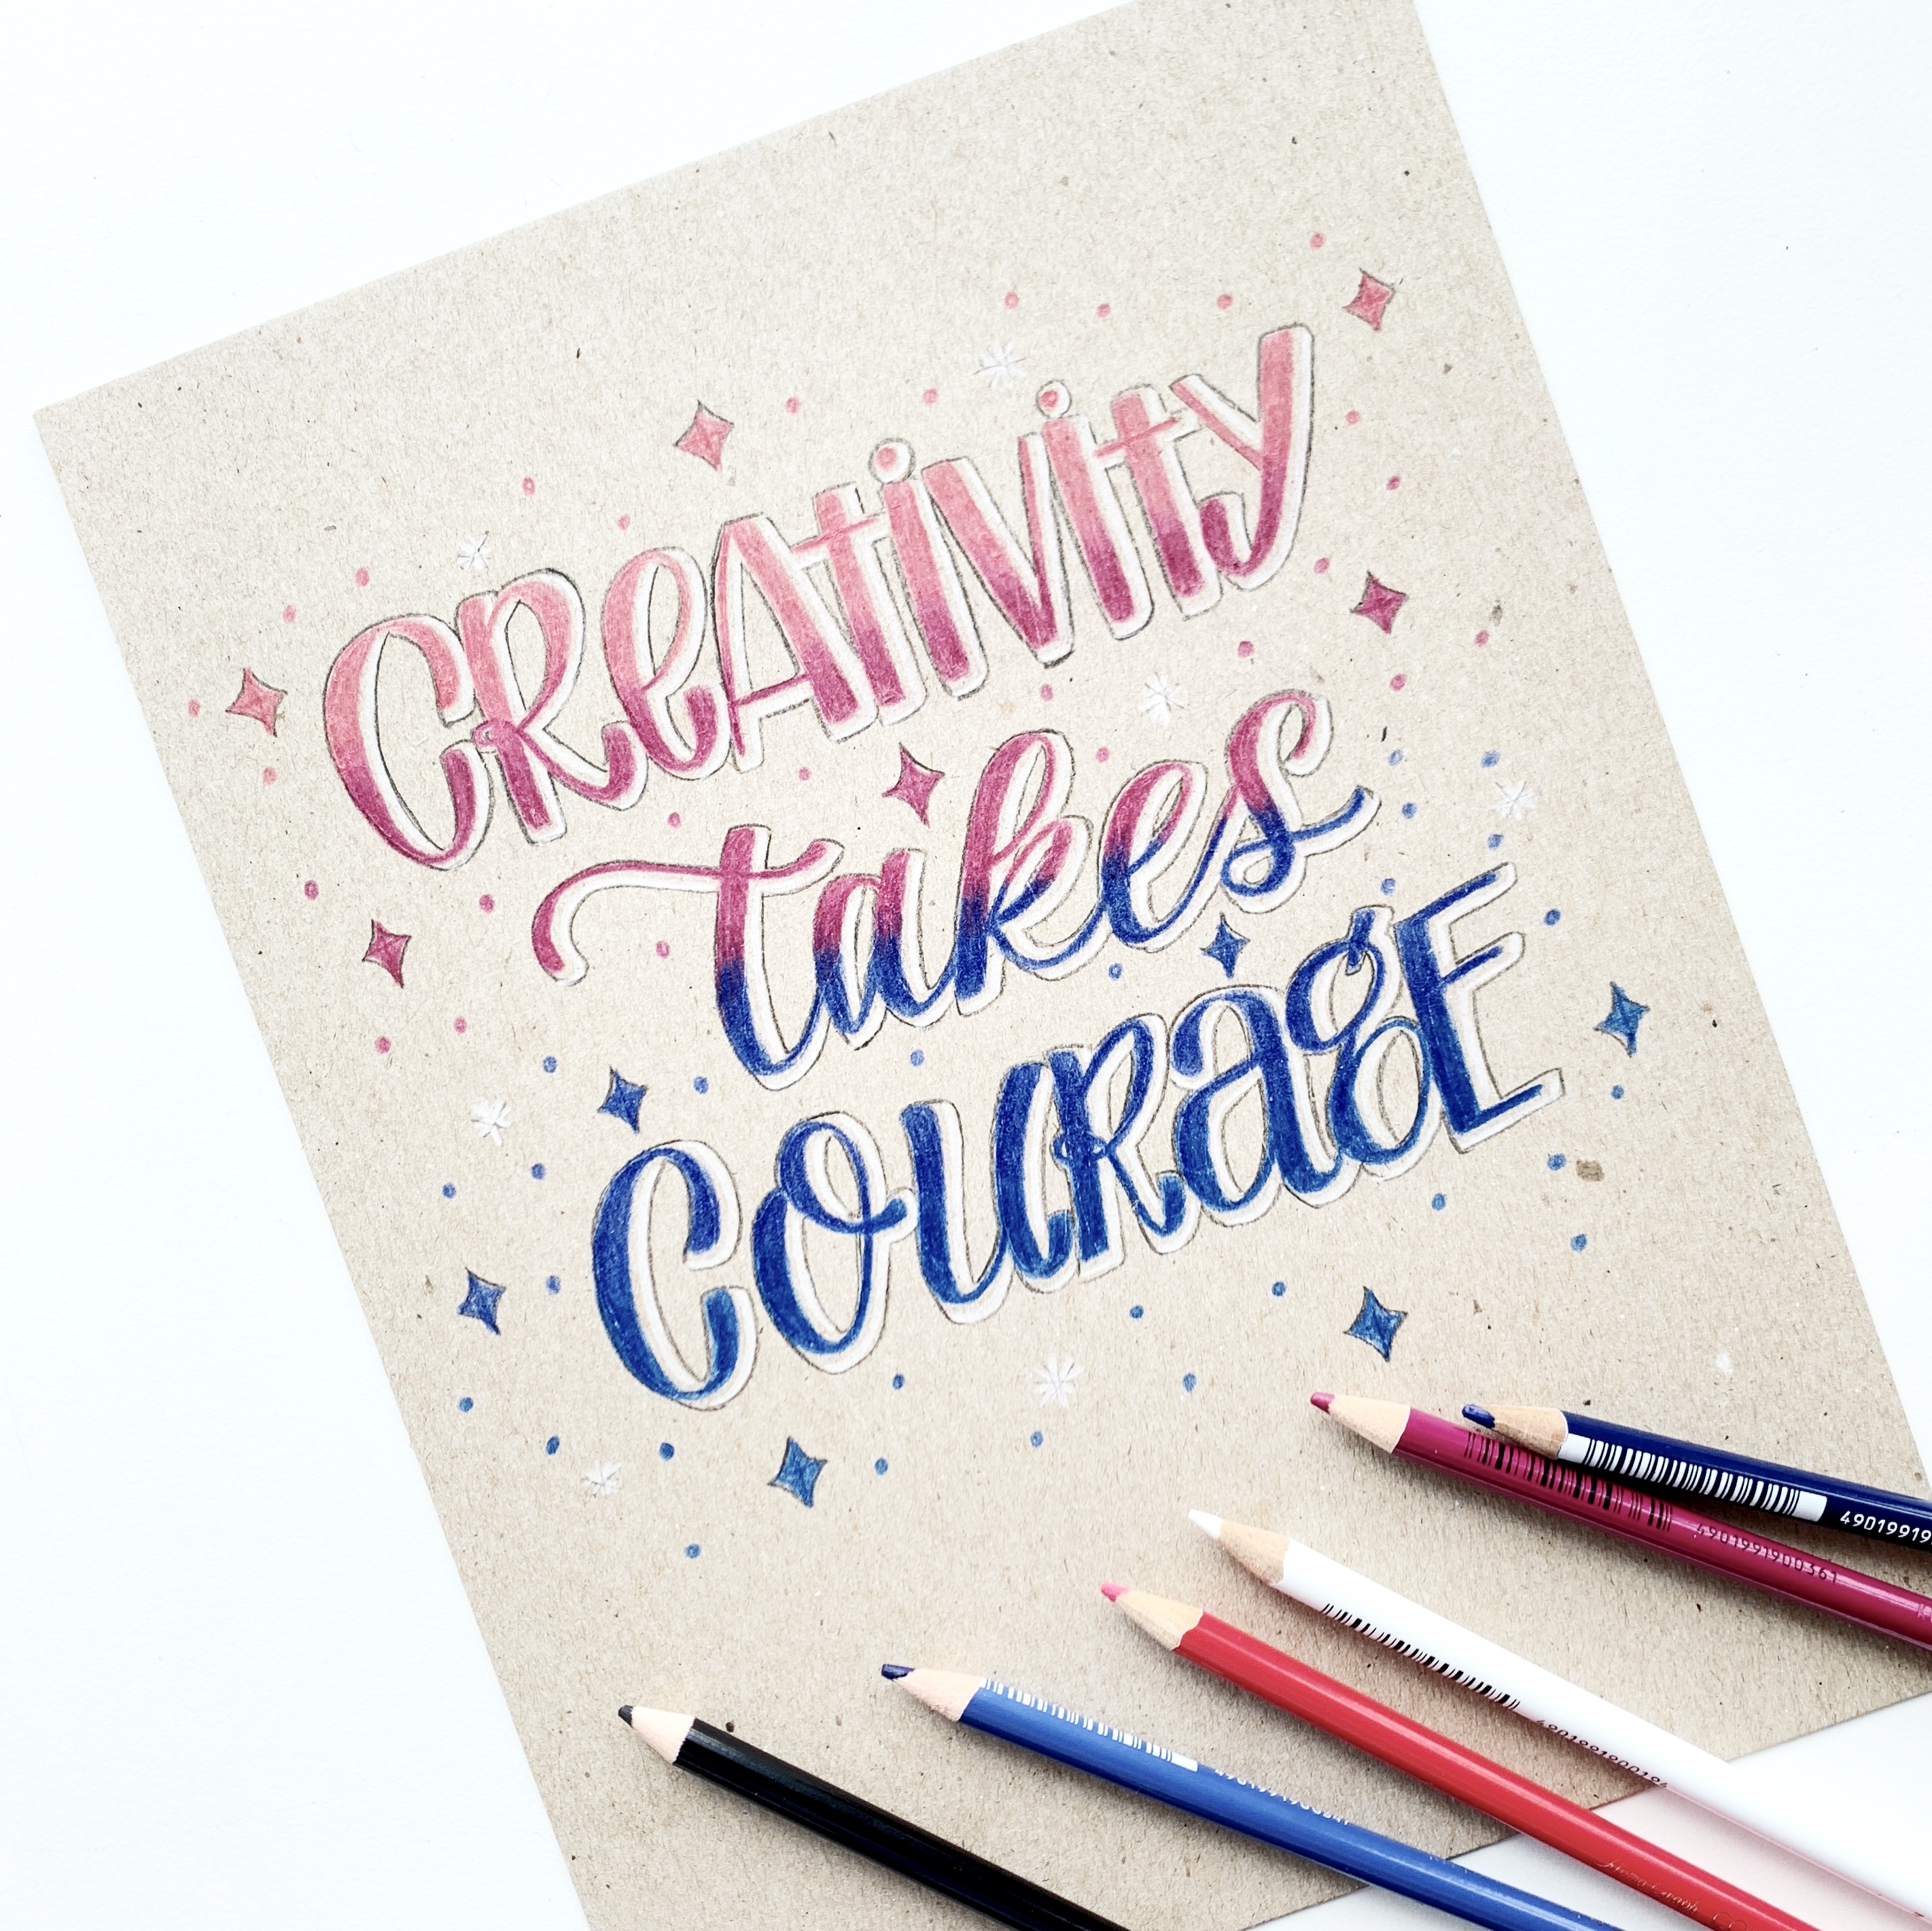 Learn how to create blended lettering using colored pencils with Adrienne from @studio80design